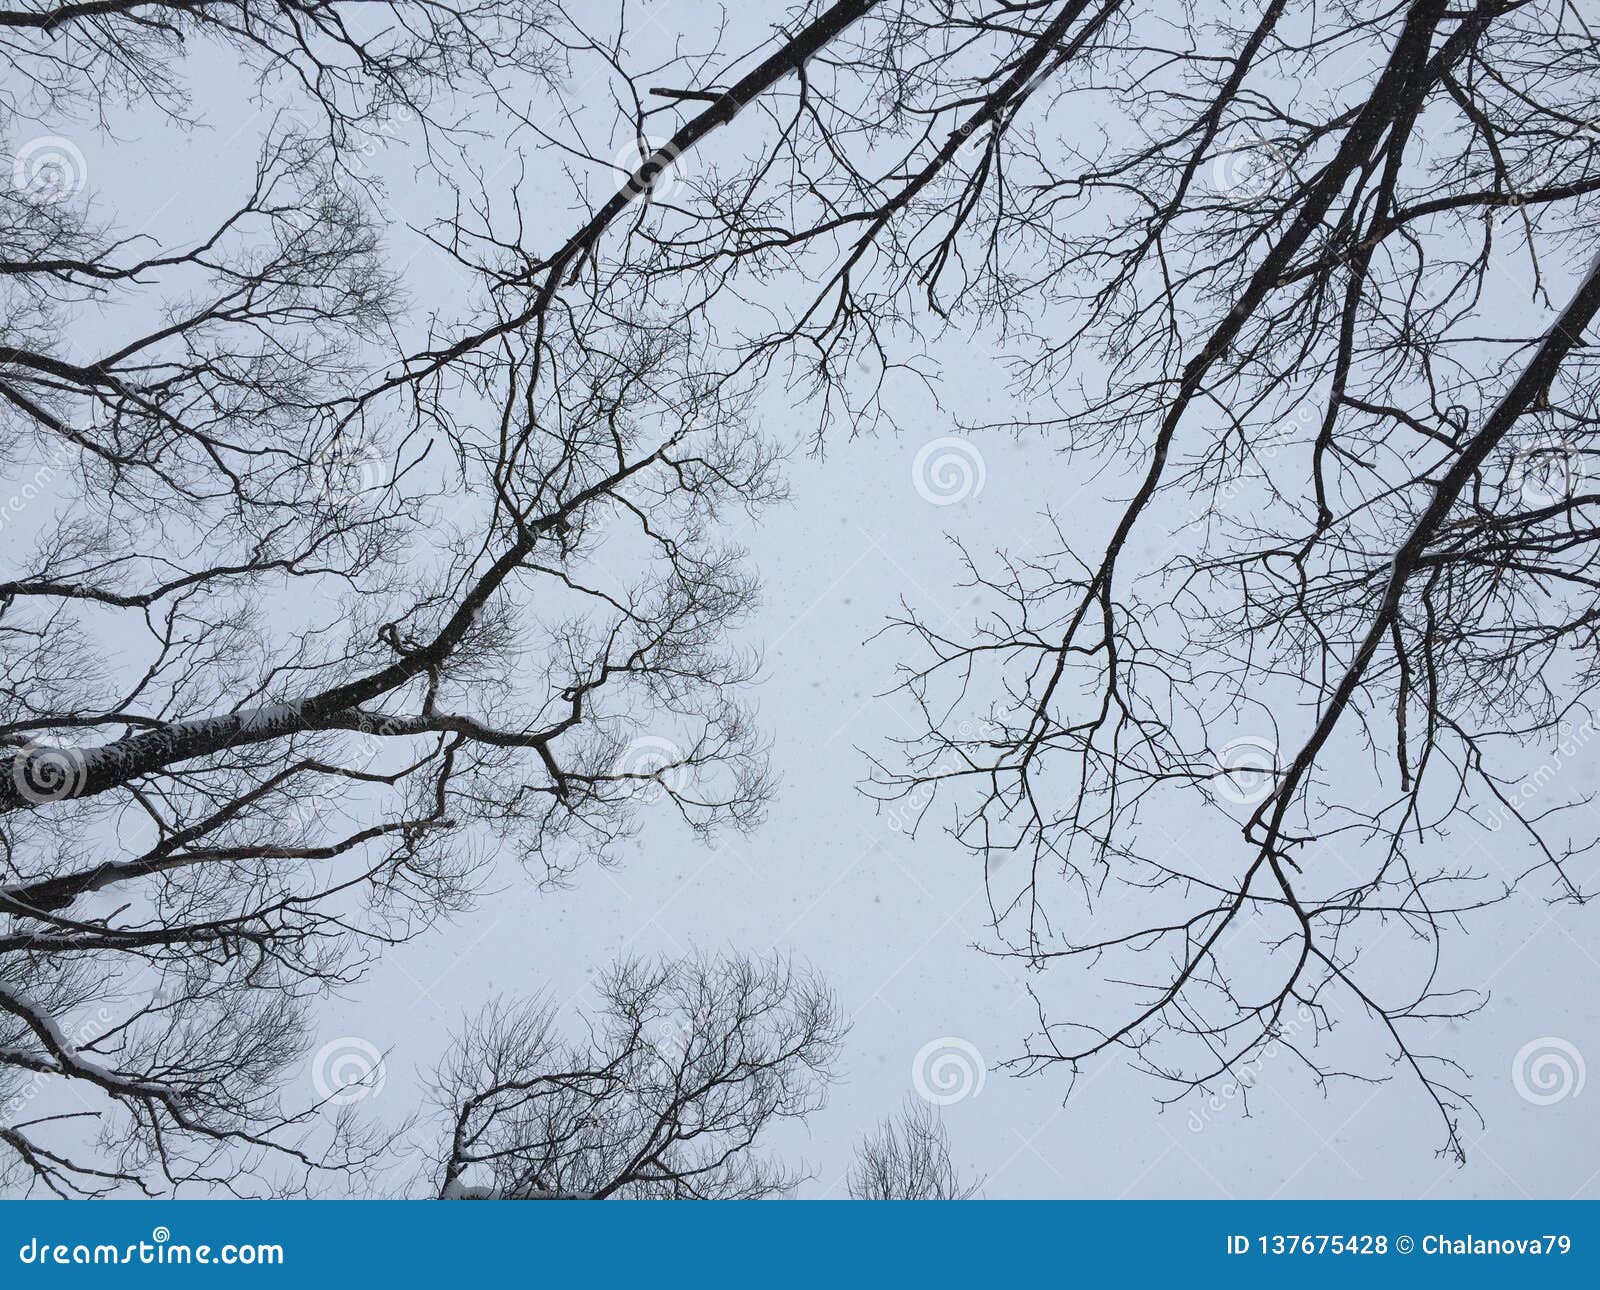 Snow Covered Tree Branches Against Sky Stock Image - Image 